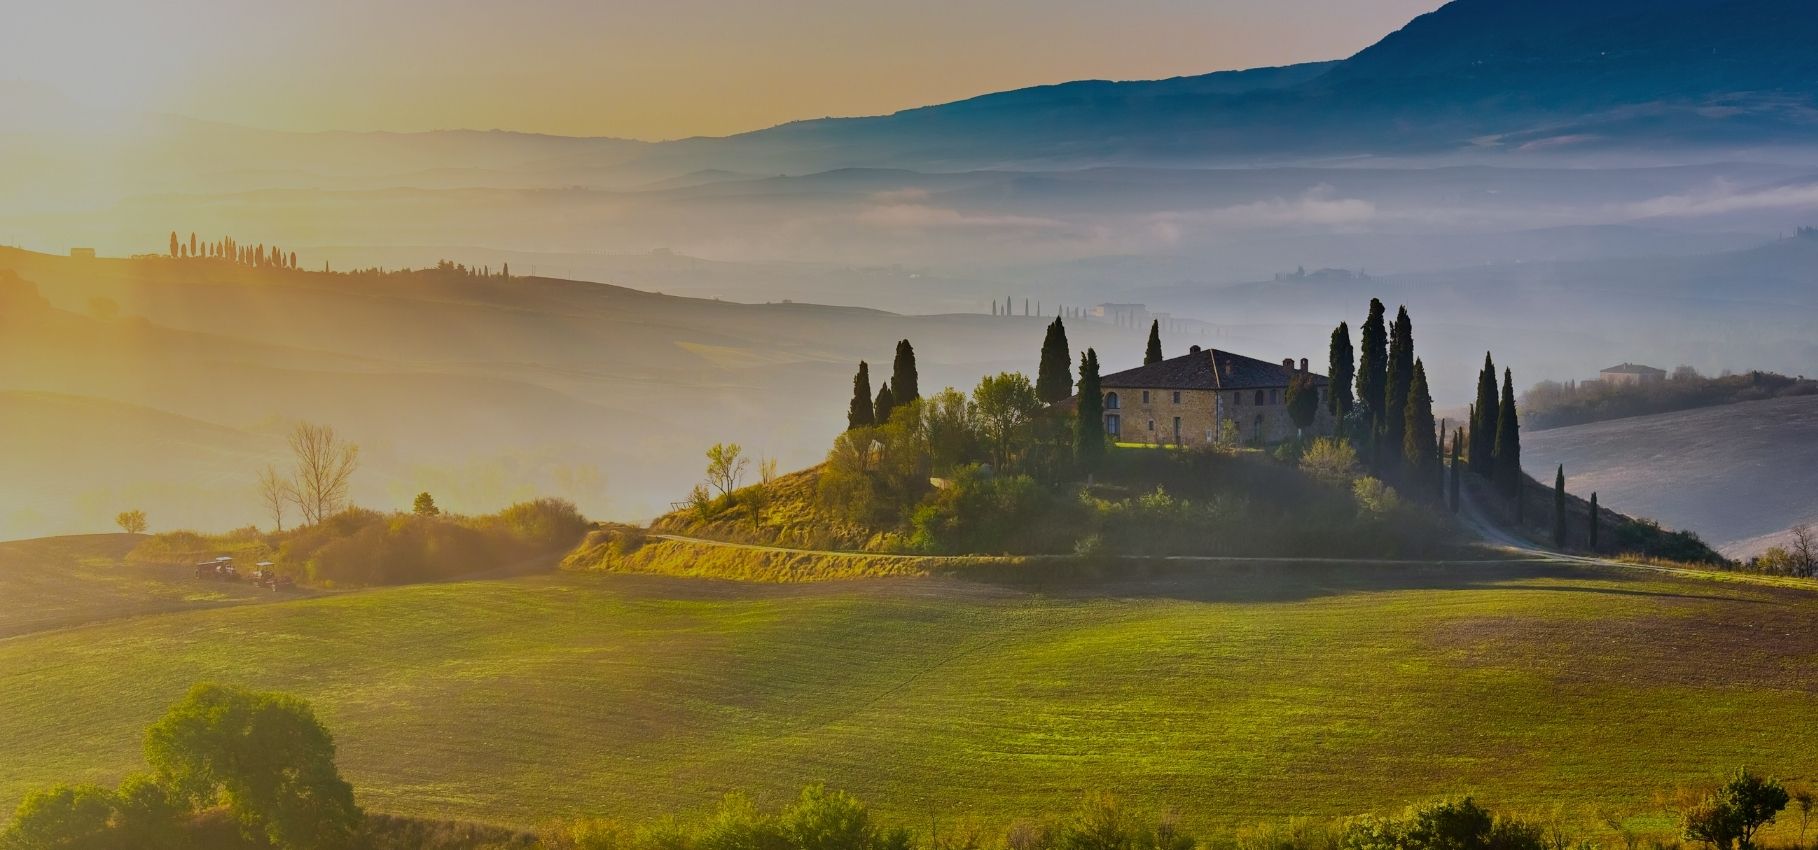 Tuscany day tour in Italy